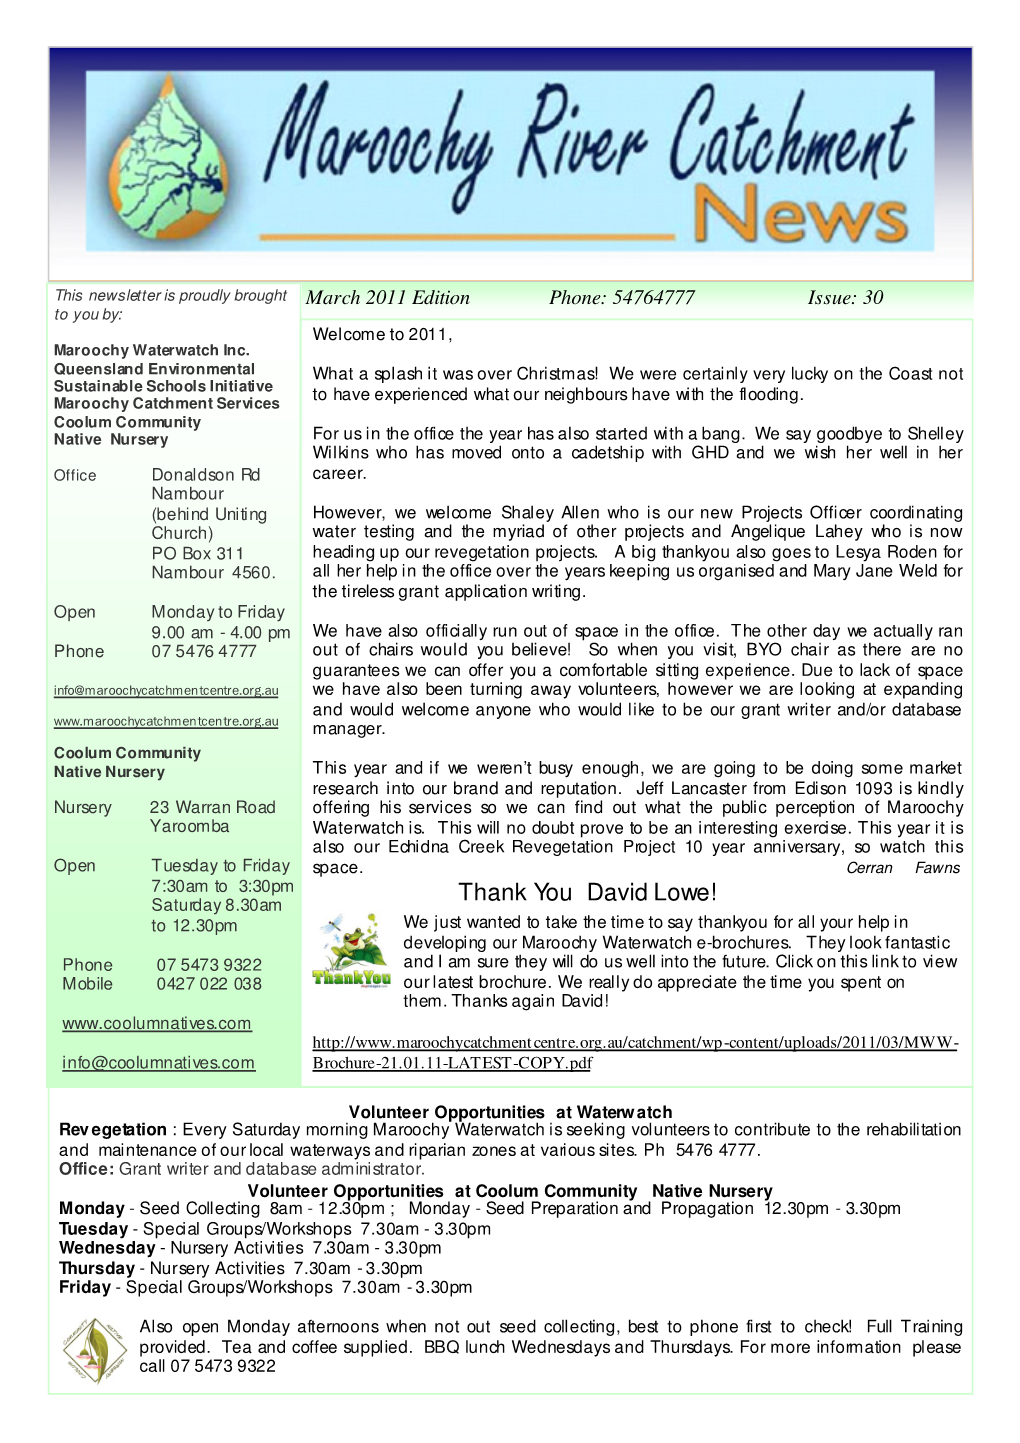 Maroochy River Catchment News March